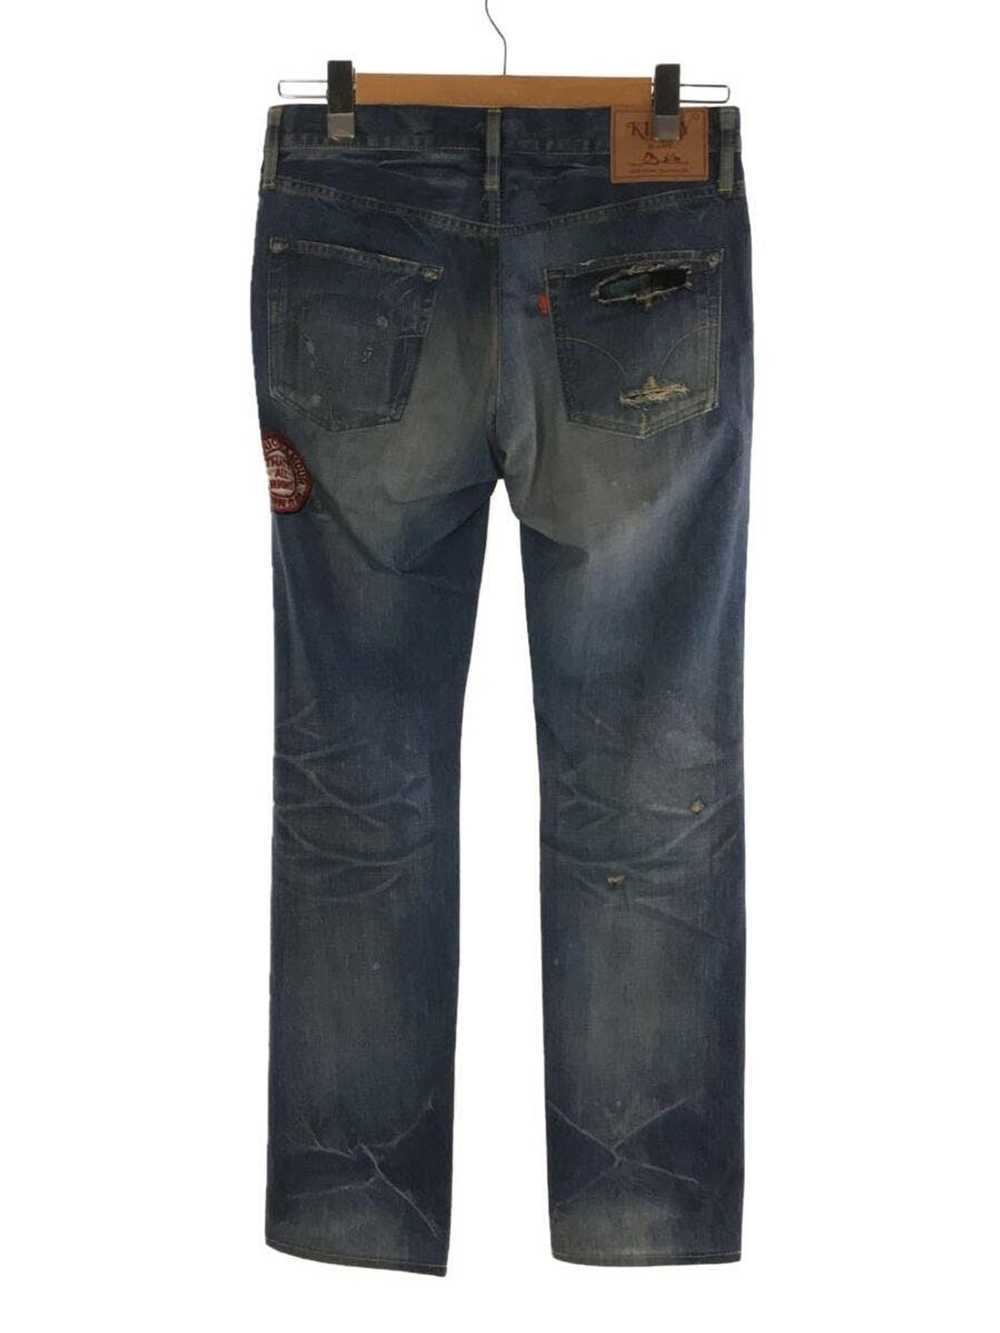 Hysteric Glamour Distressed Repair Patch Denim Je… - image 2